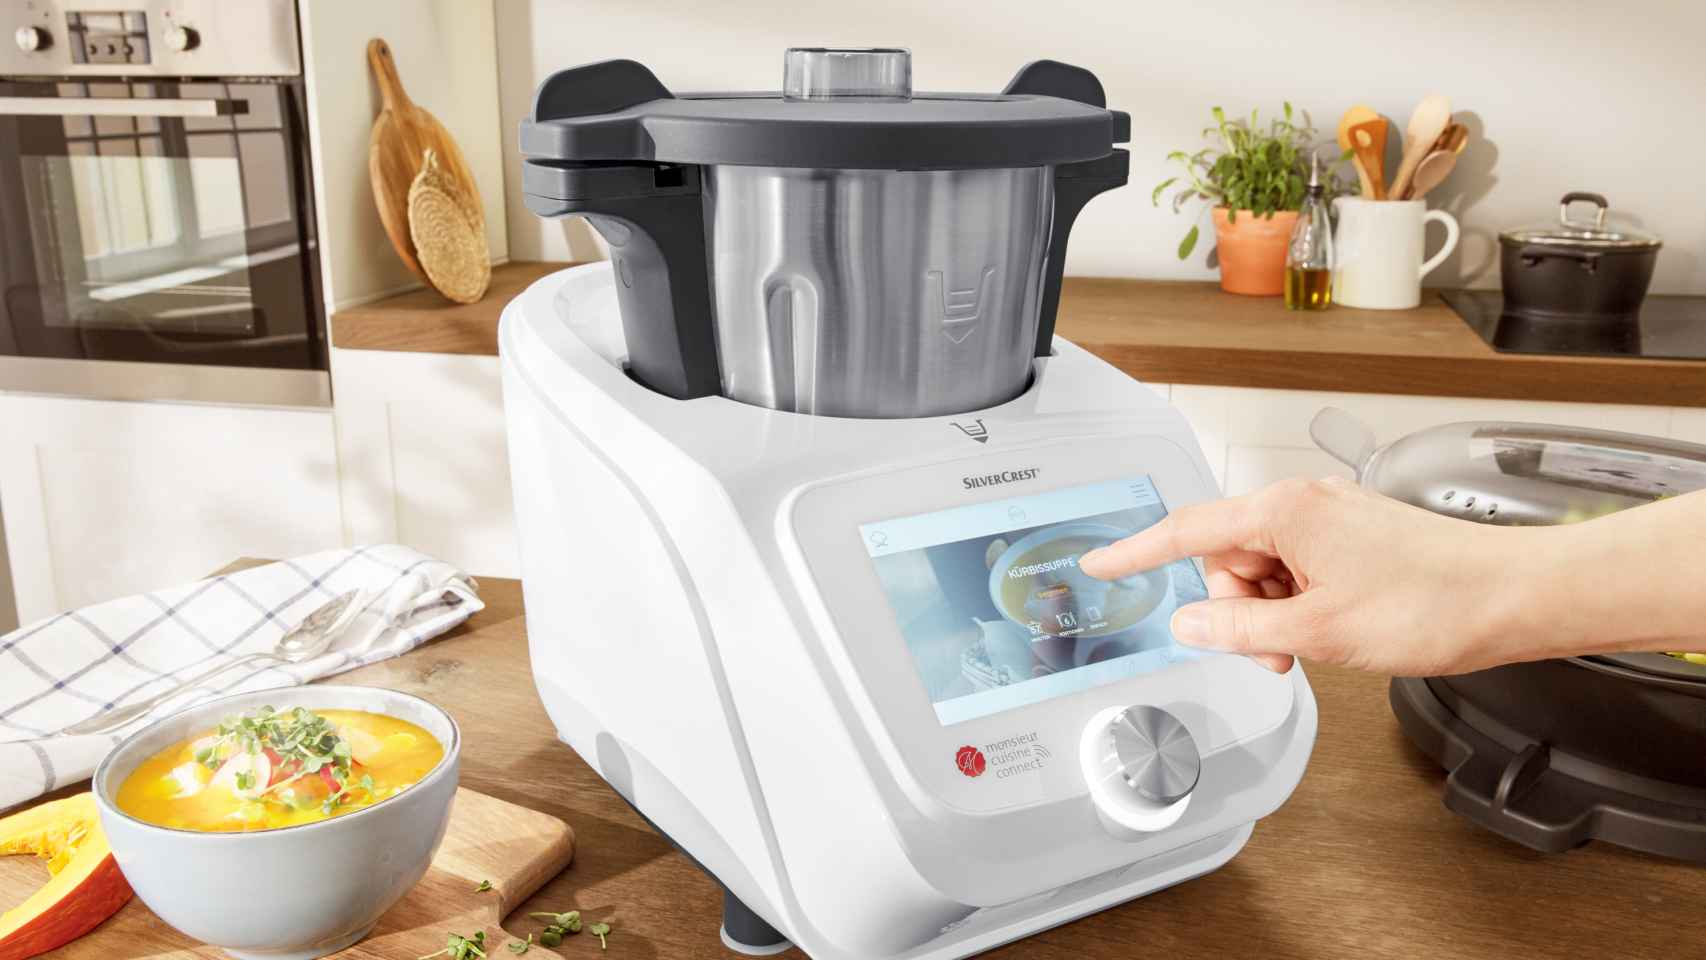 These are the best kitchen robots, according to the OCU Lidl, Moulinex